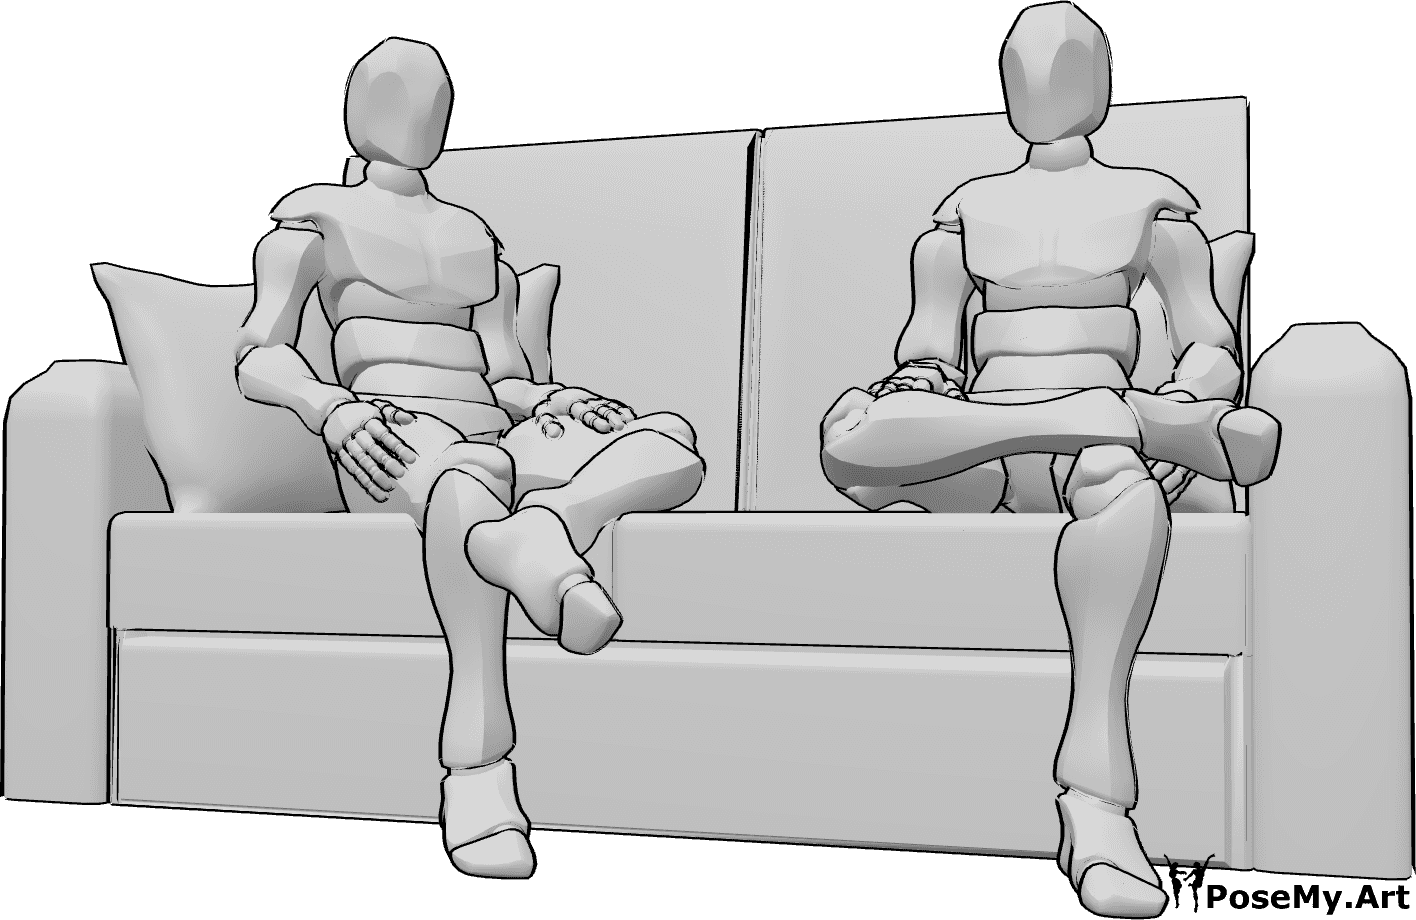 Pose Reference- Males sitting pose - Two males are sitting on the couch casually and looking forward